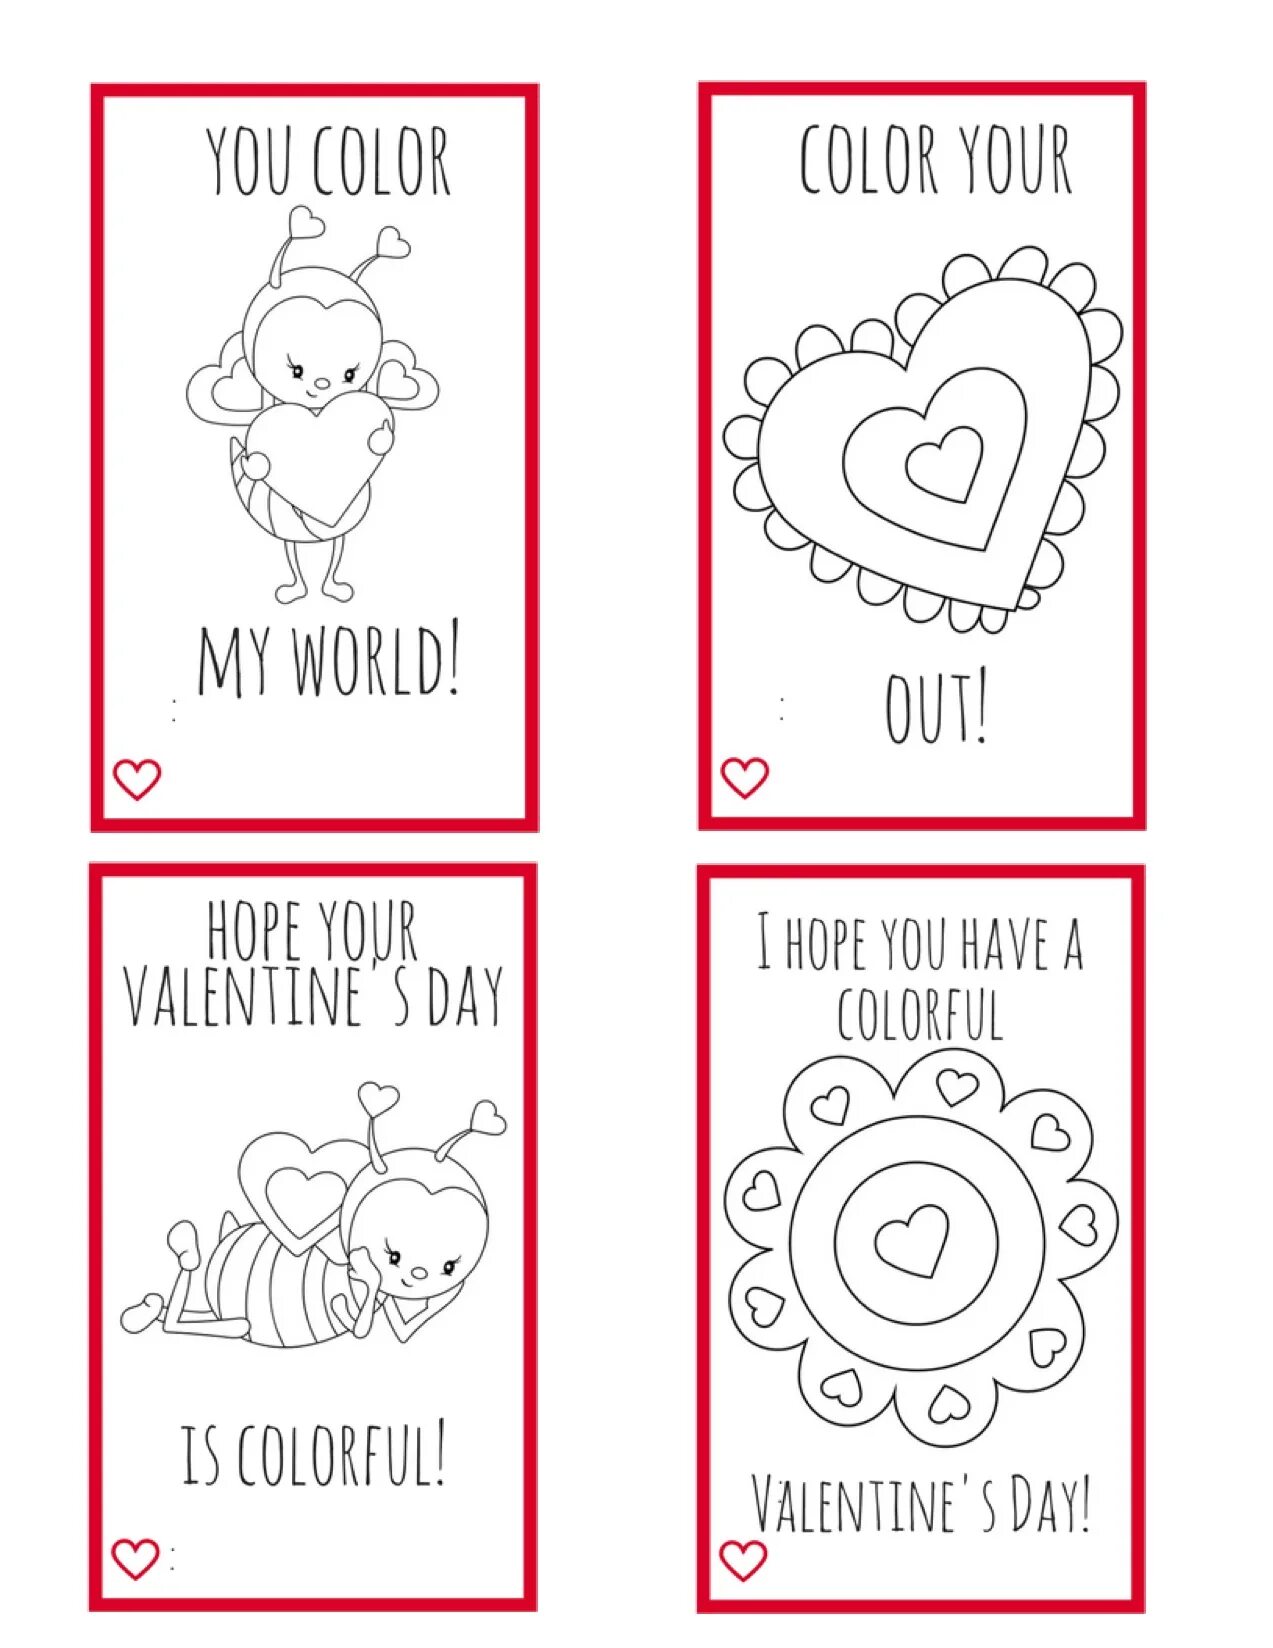 Printable cards. Valentine's Day Cards for Kids. St Valentines Cards for Kids. St Valentine's Day Cards for Kids. Valentines Cards Printable.